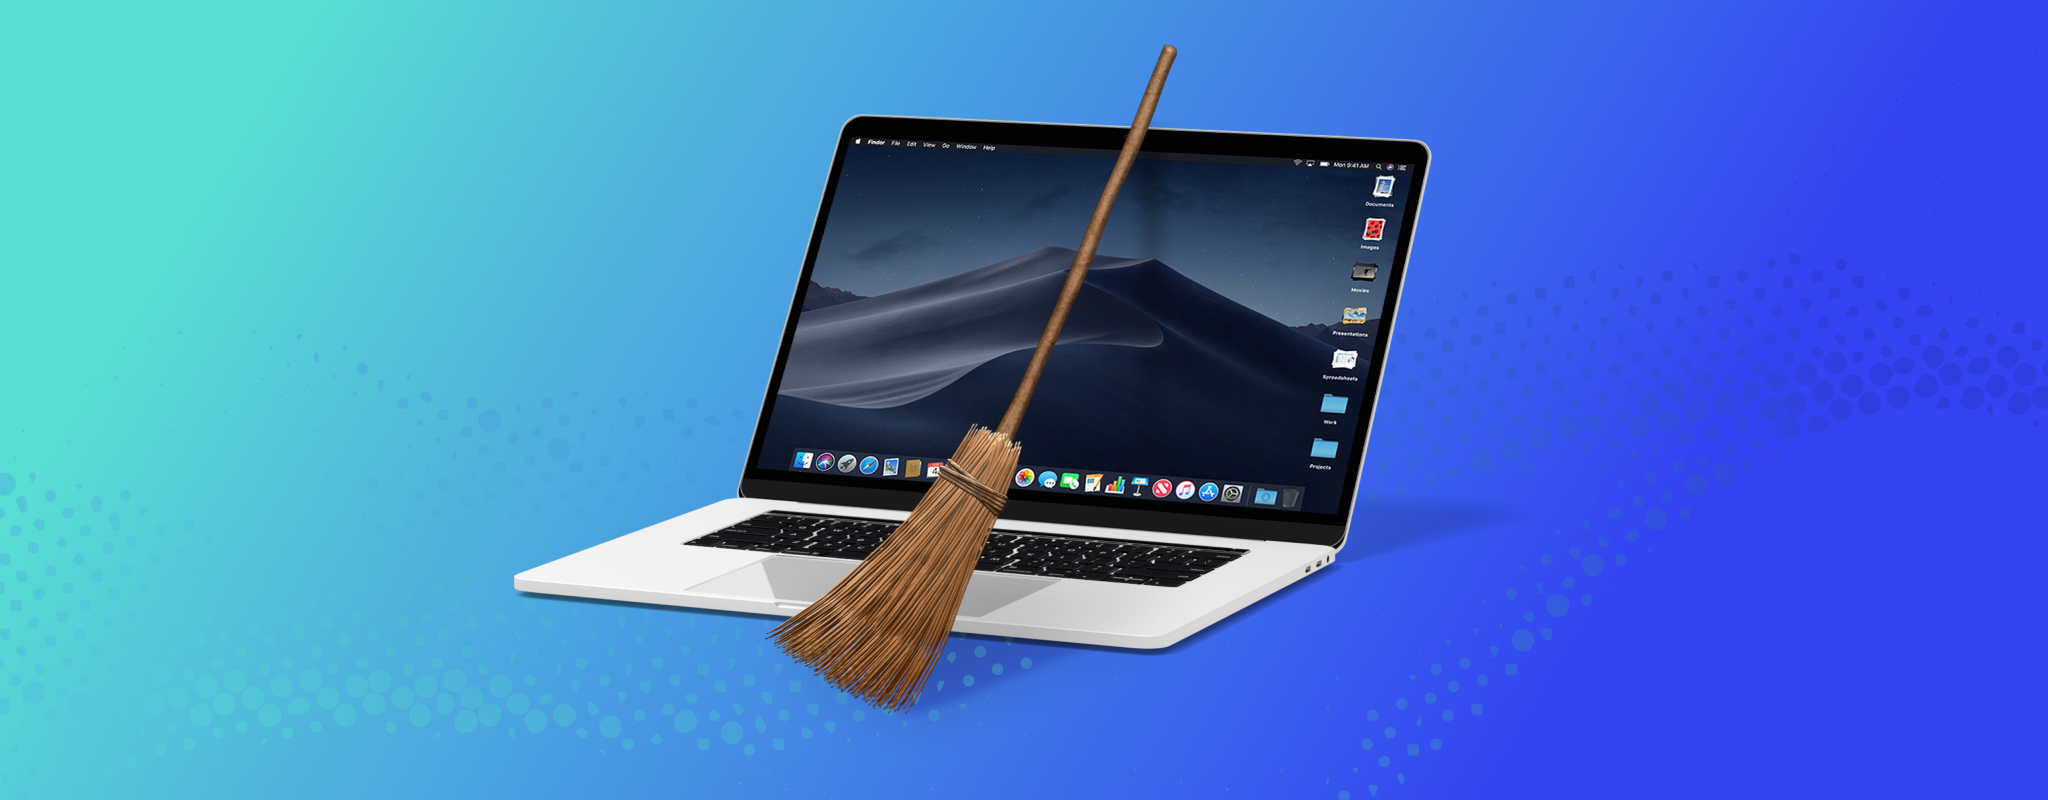 disk cleaner mac review